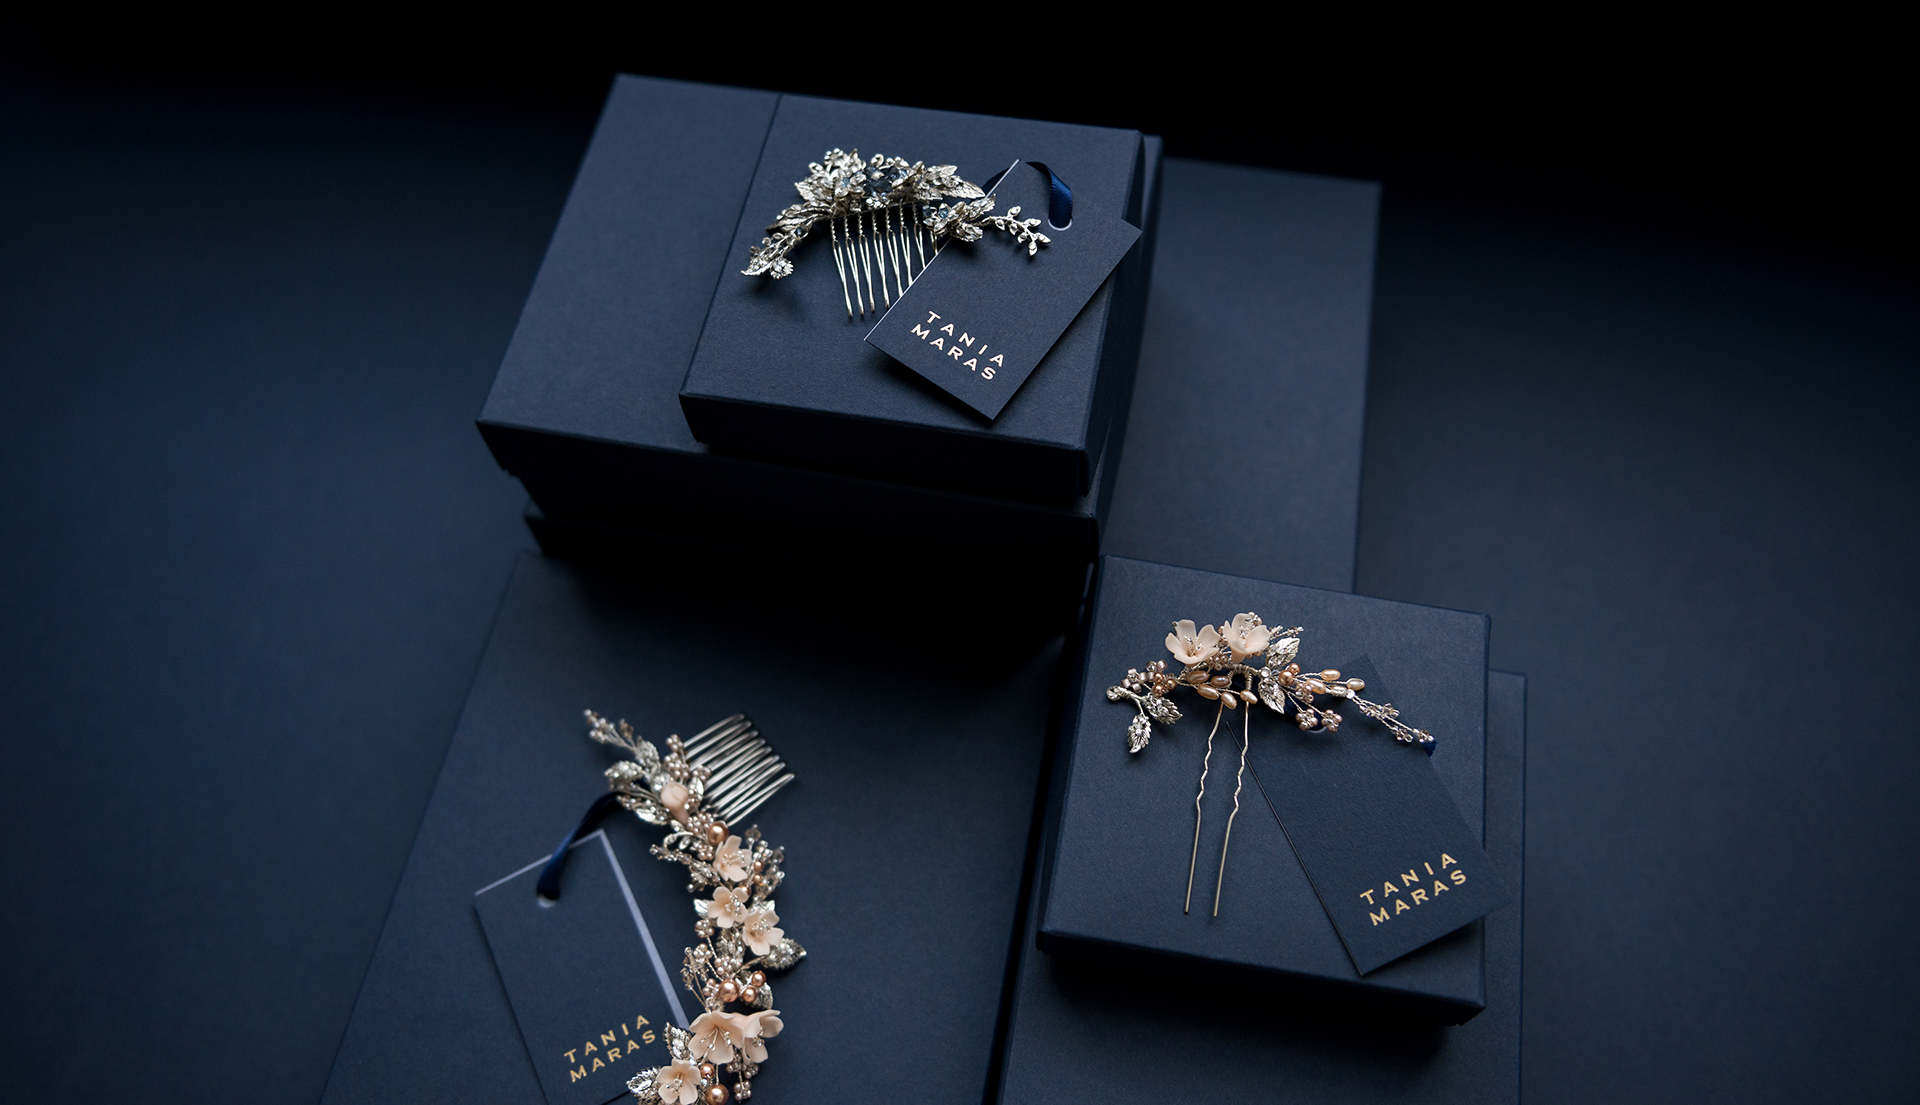 Bridal hair accessories with navy blue packaging and gold foils.